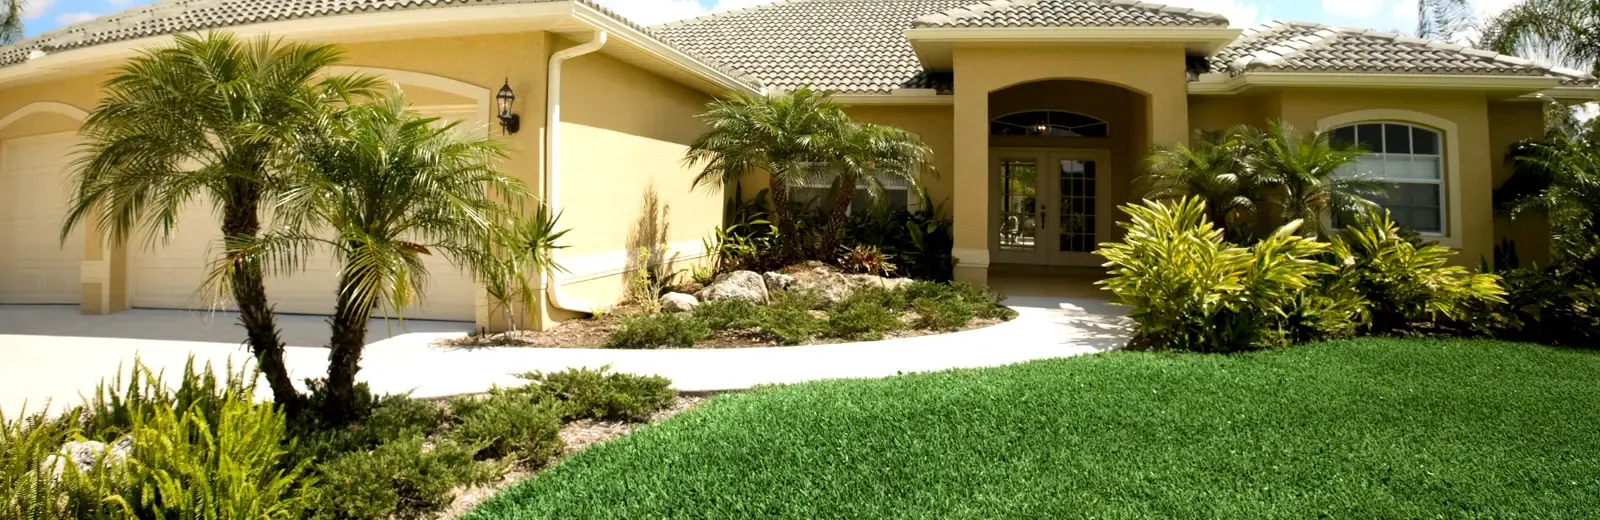 Florida home front yard, lawn pest services